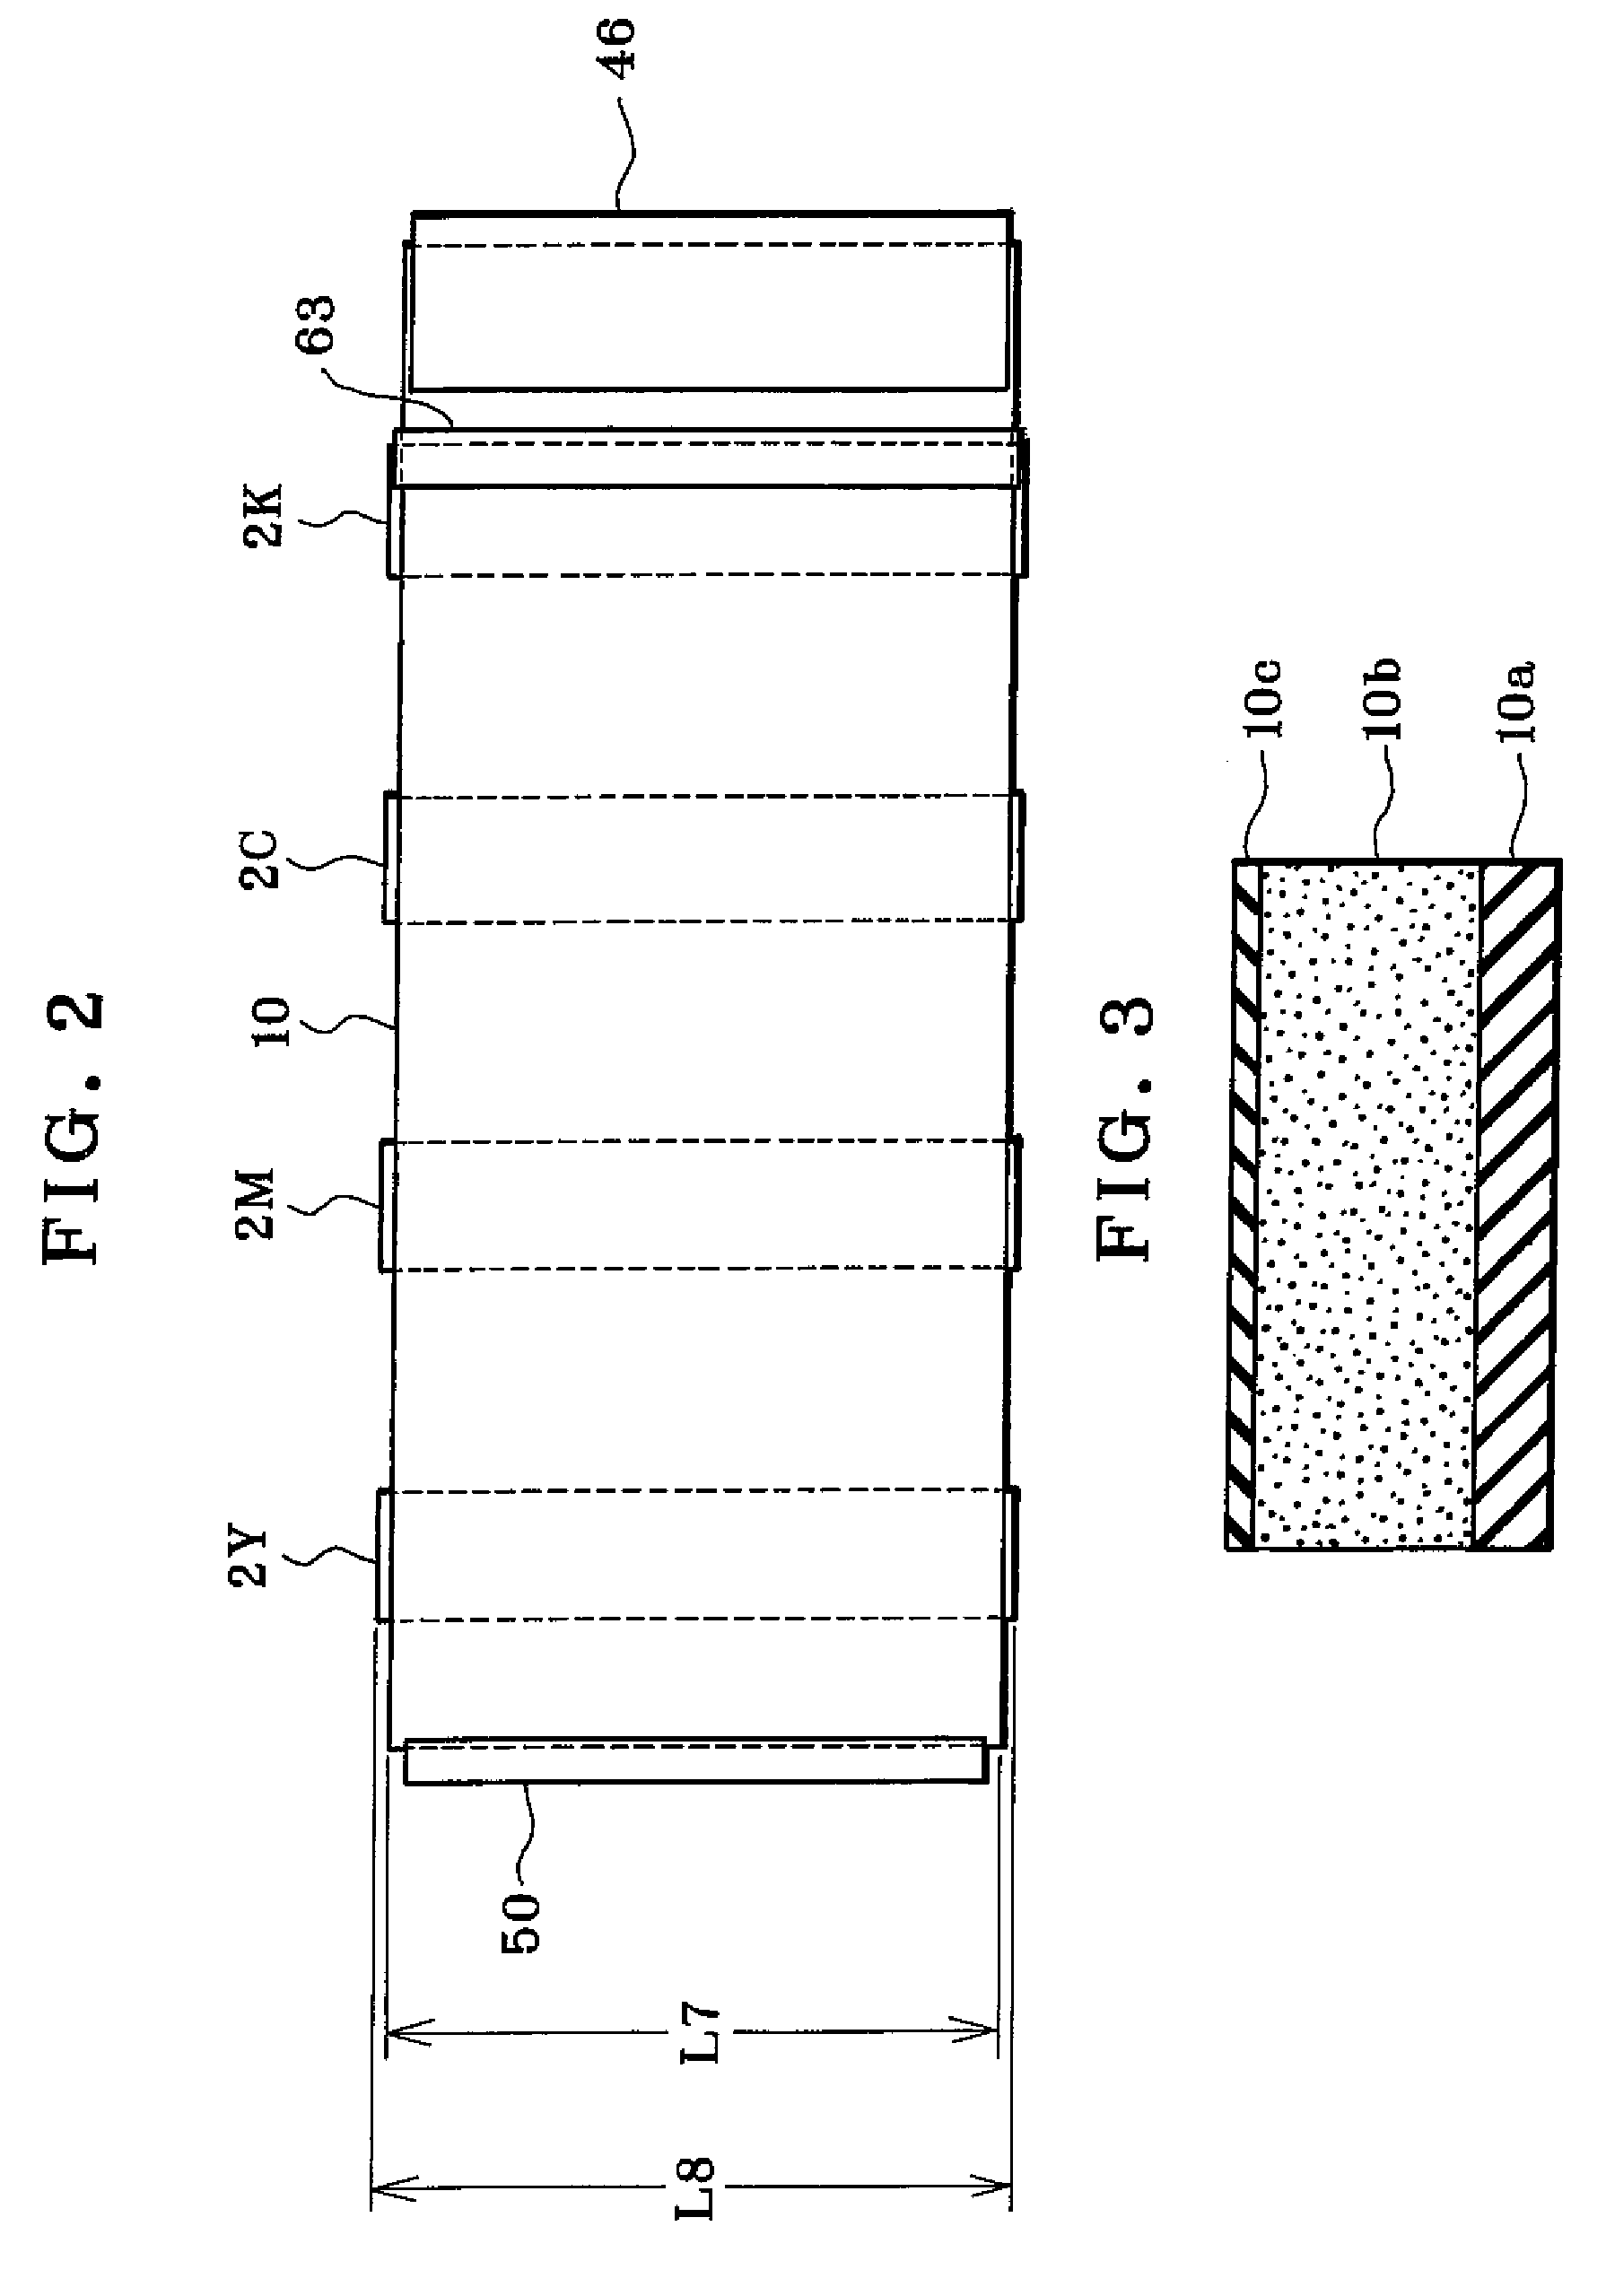 Image forming apparatus having transfer belt and cleaning arrangement